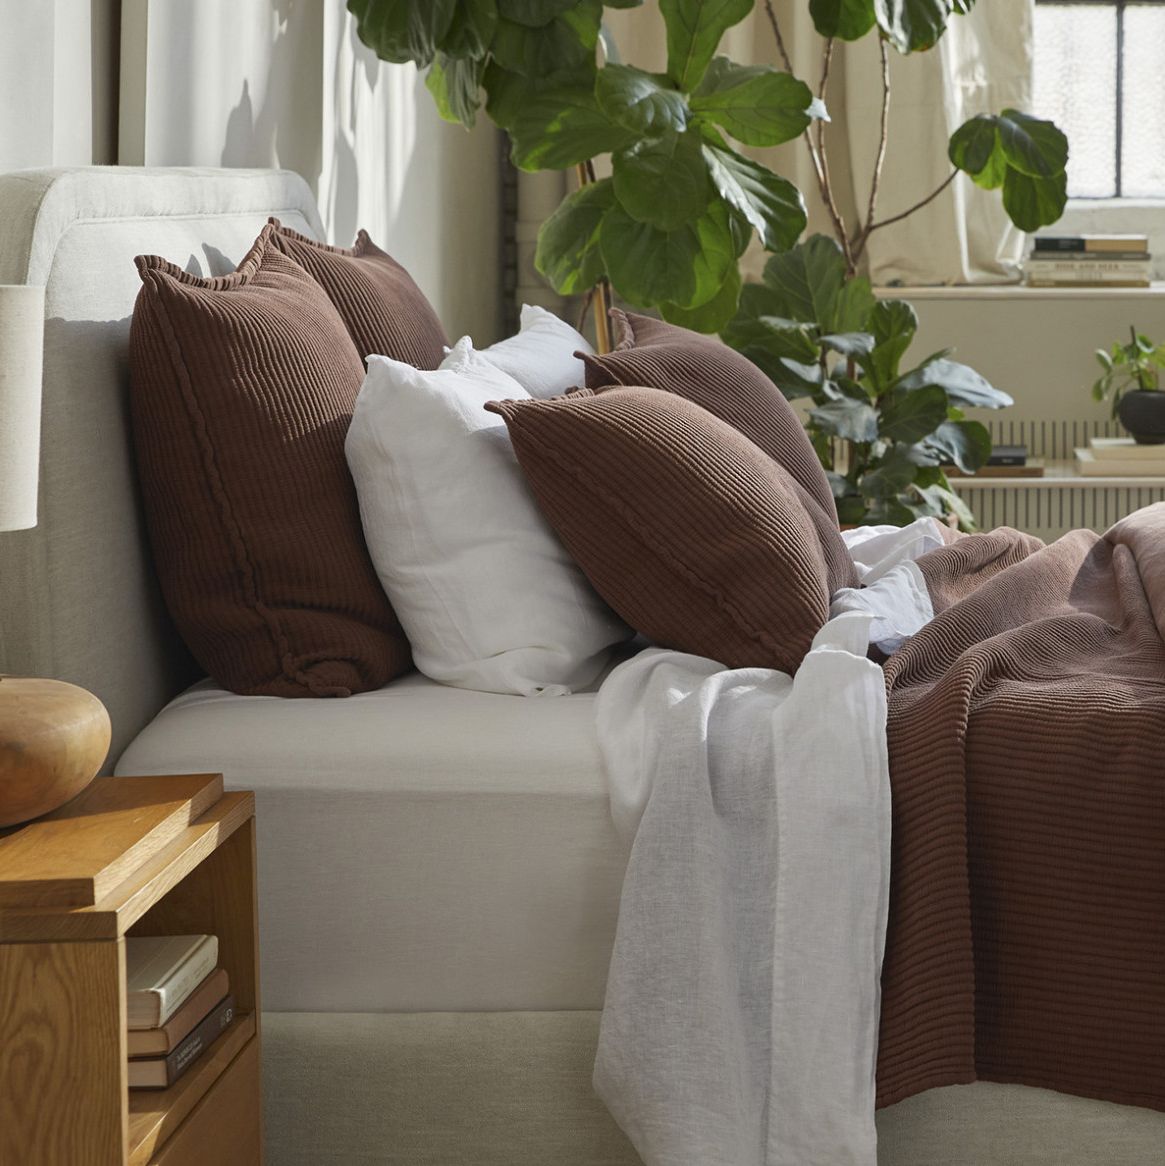 Cult-Favorite Bedding Brand Parachute Is Having Its First-Ever Warehouse Sale